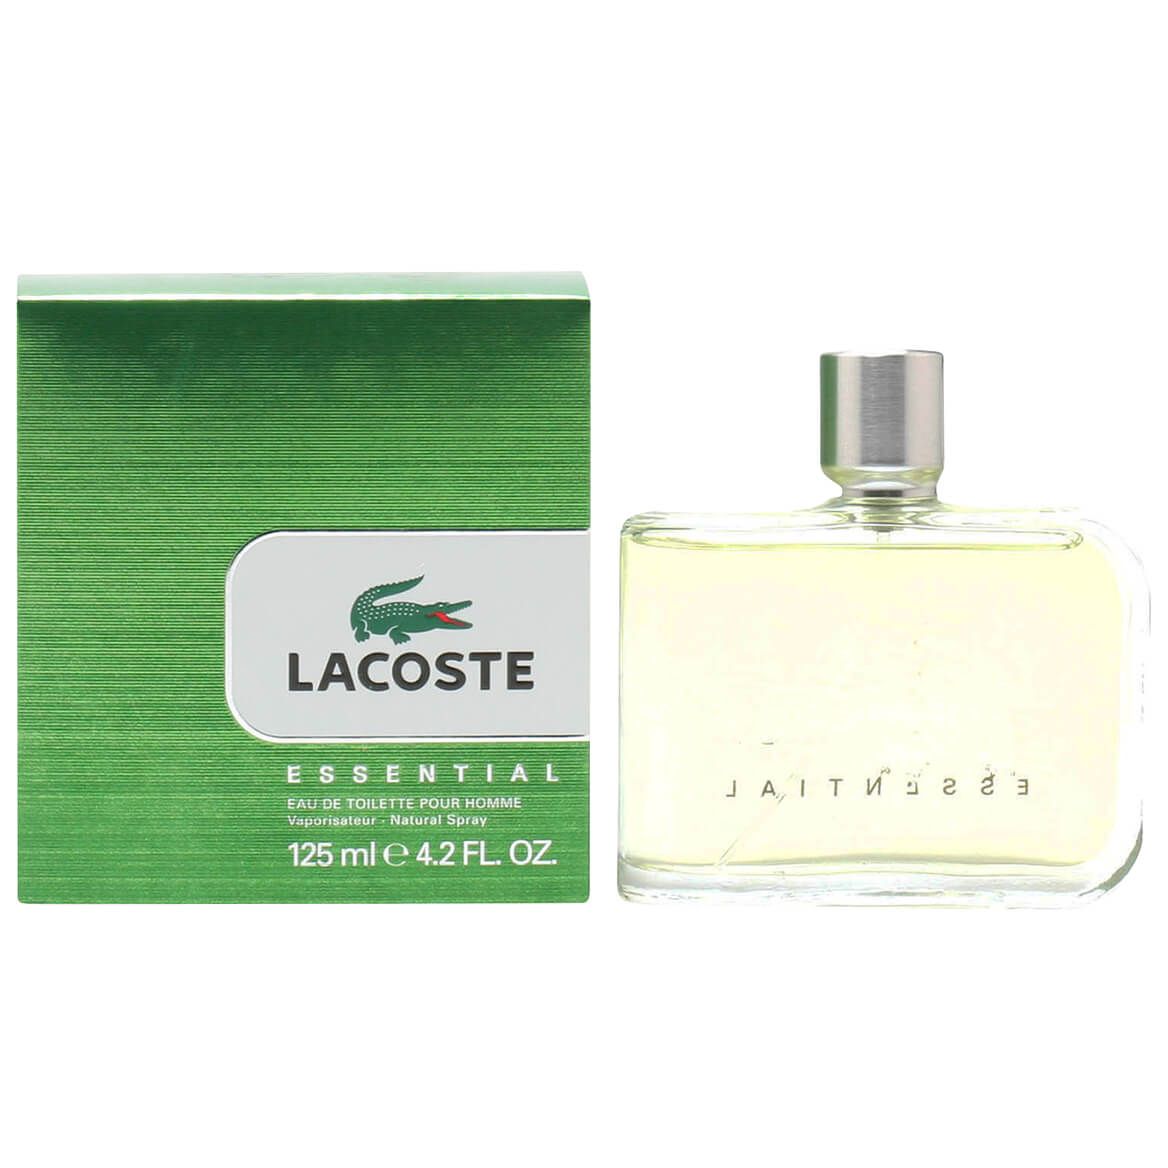 Lacoste Essential by Lacoste for Men EDT, 4.2 oz. + '-' + 373171